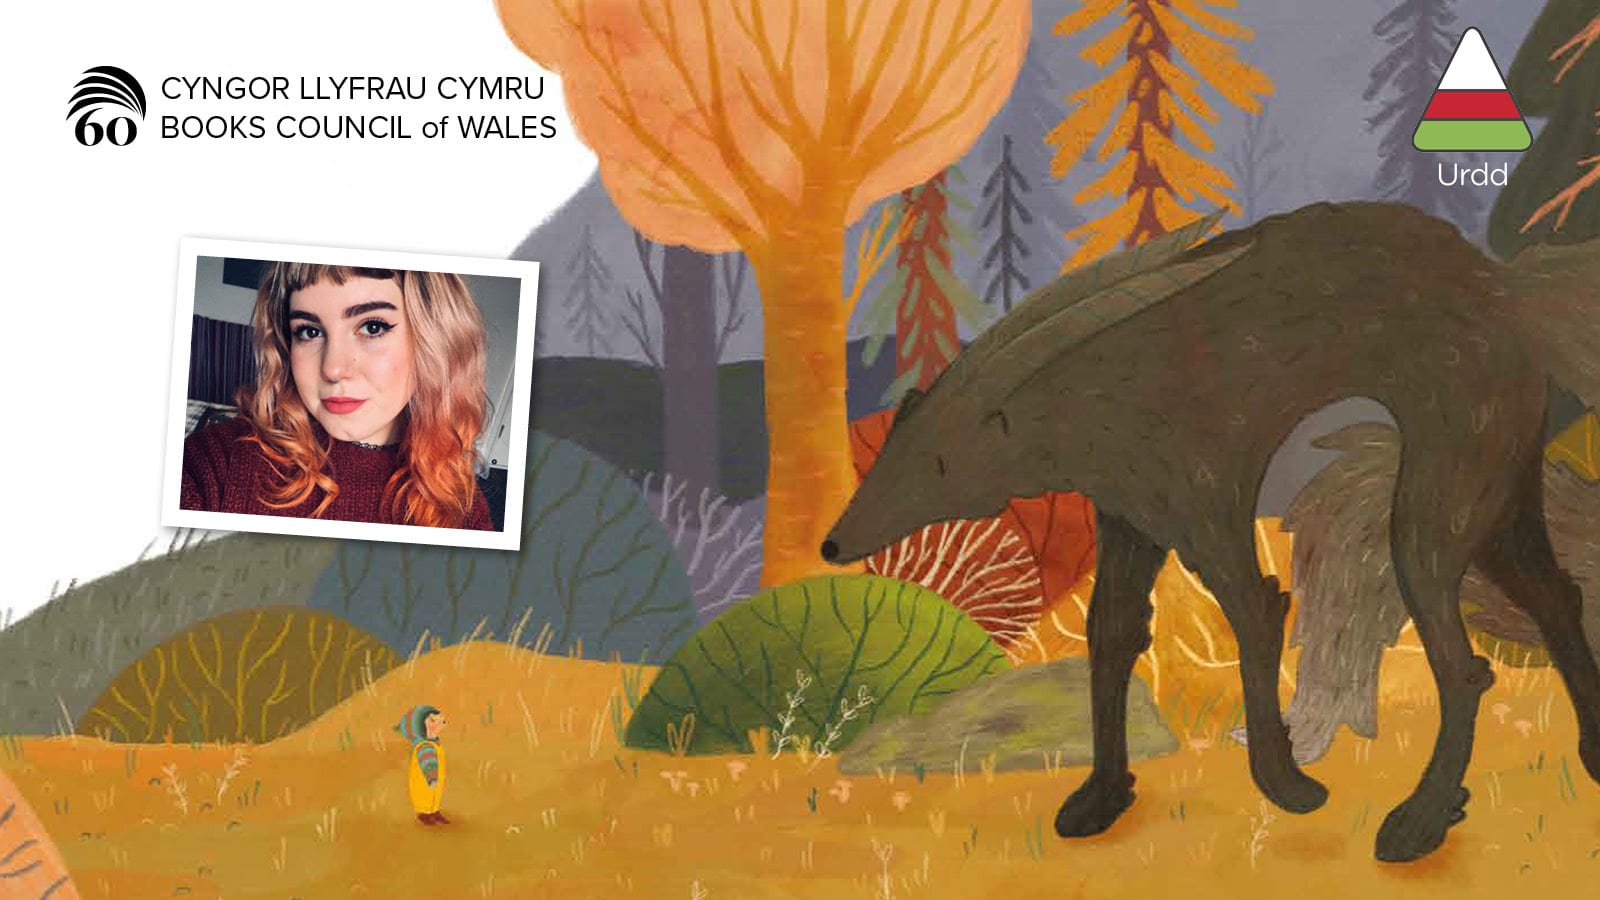 Winner of children’s picture book illustration competition announced